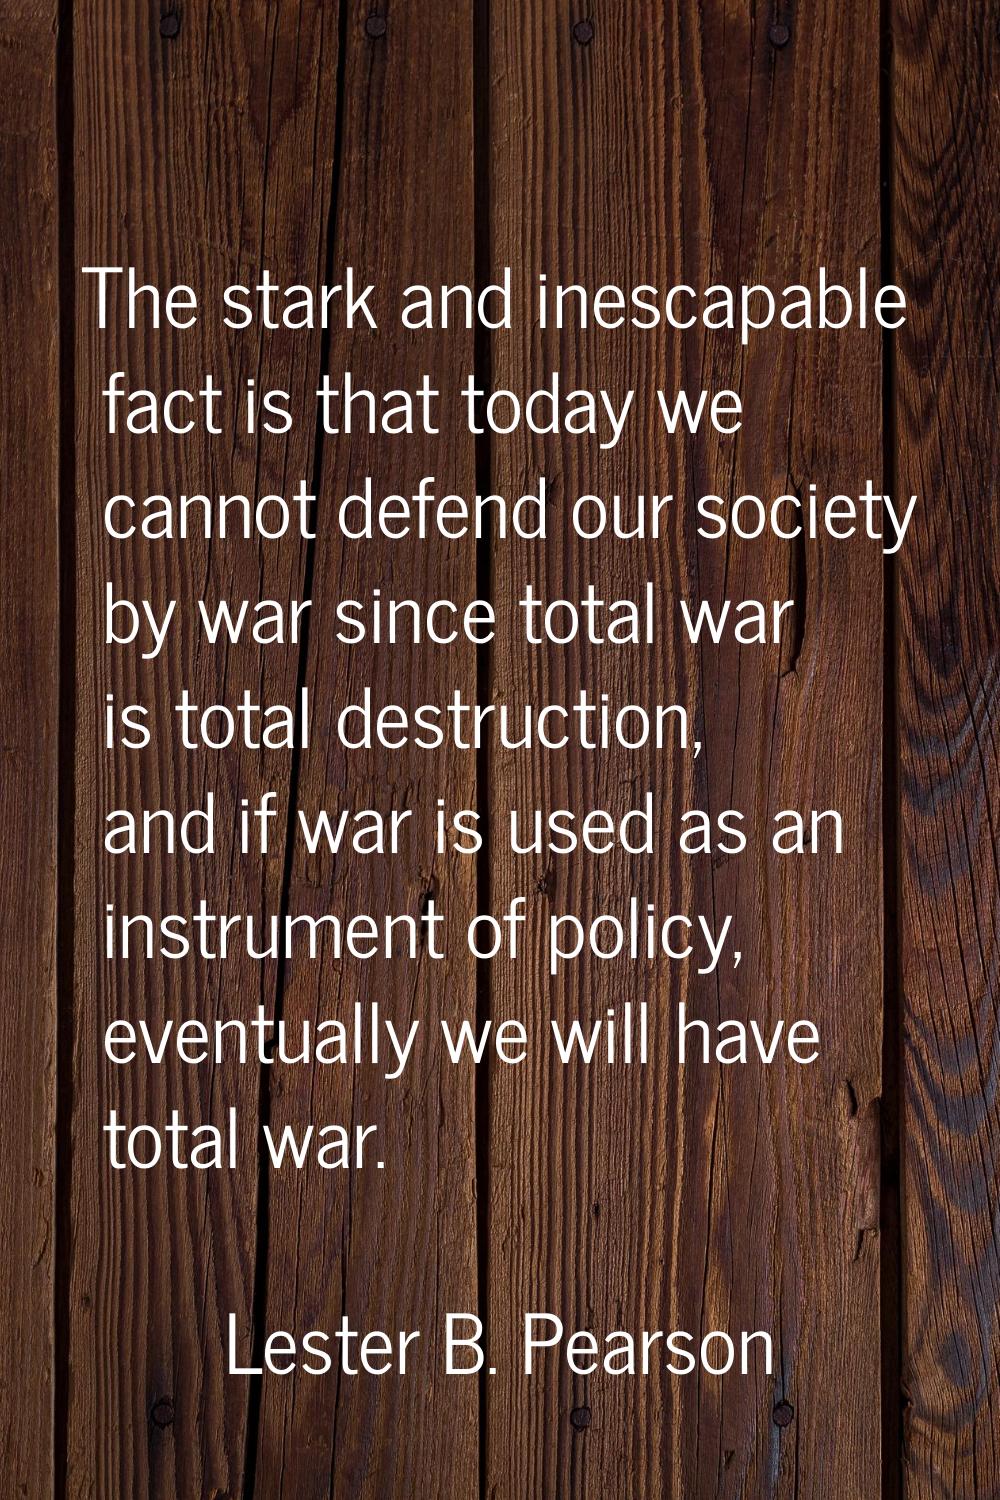 The stark and inescapable fact is that today we cannot defend our society by war since total war is